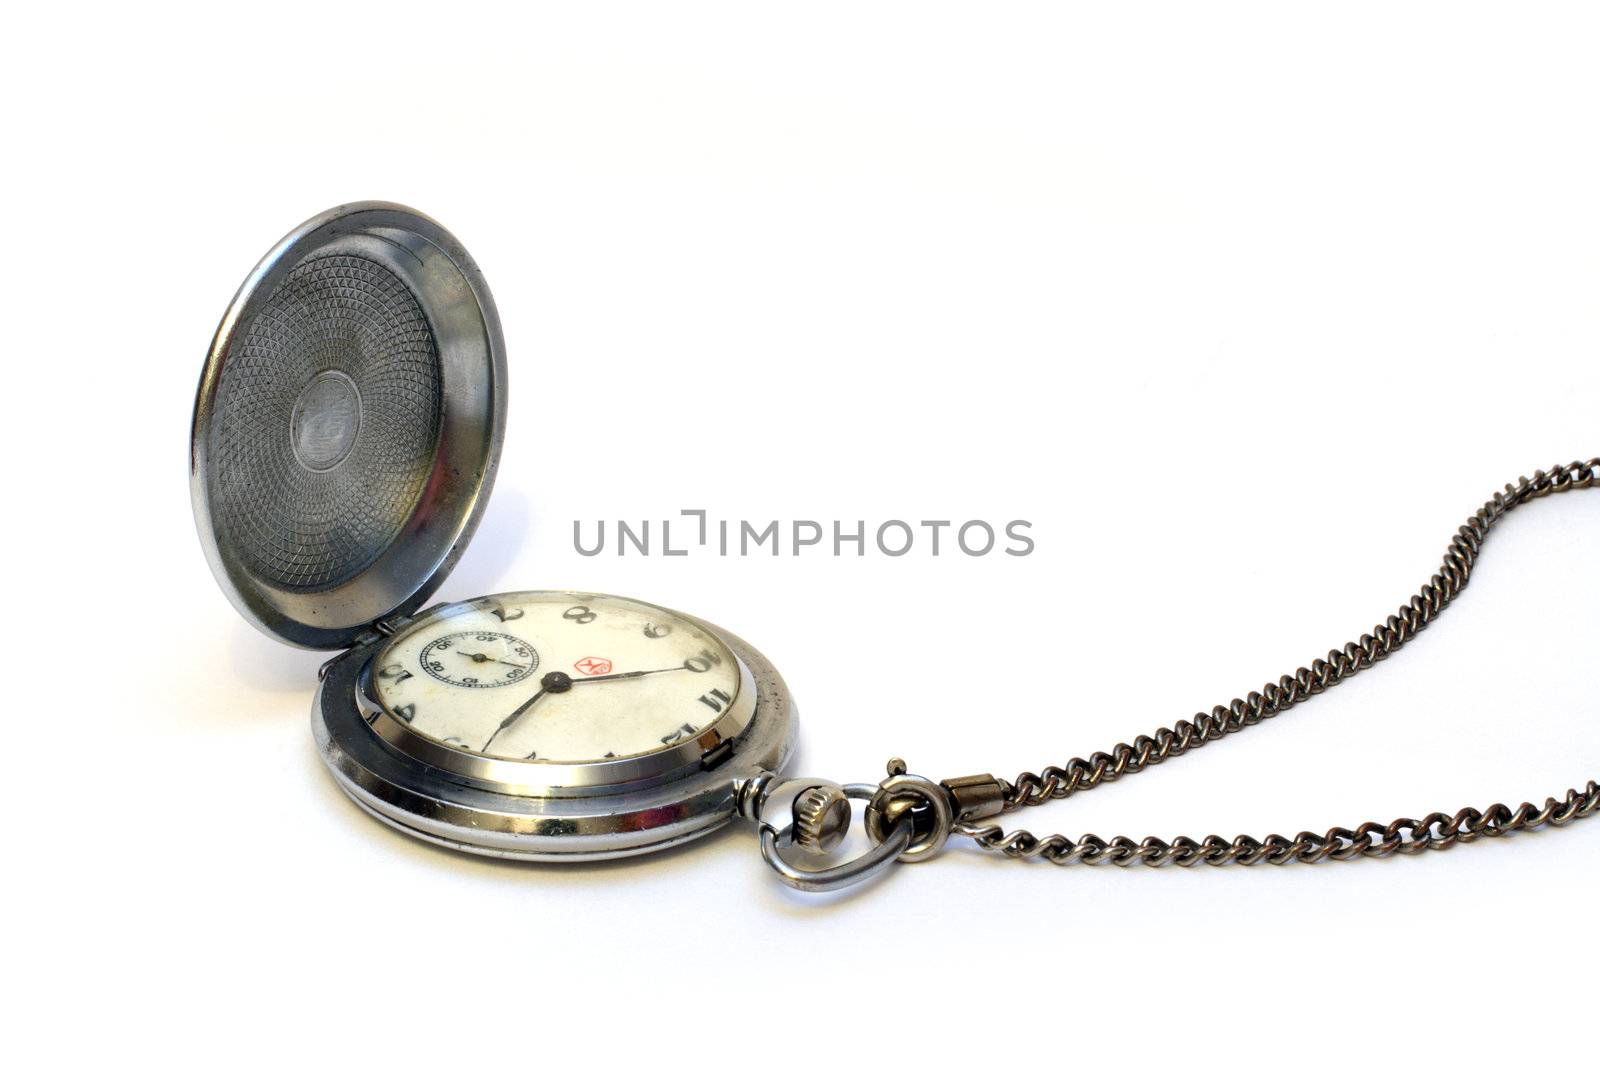 old pocket watch with chain